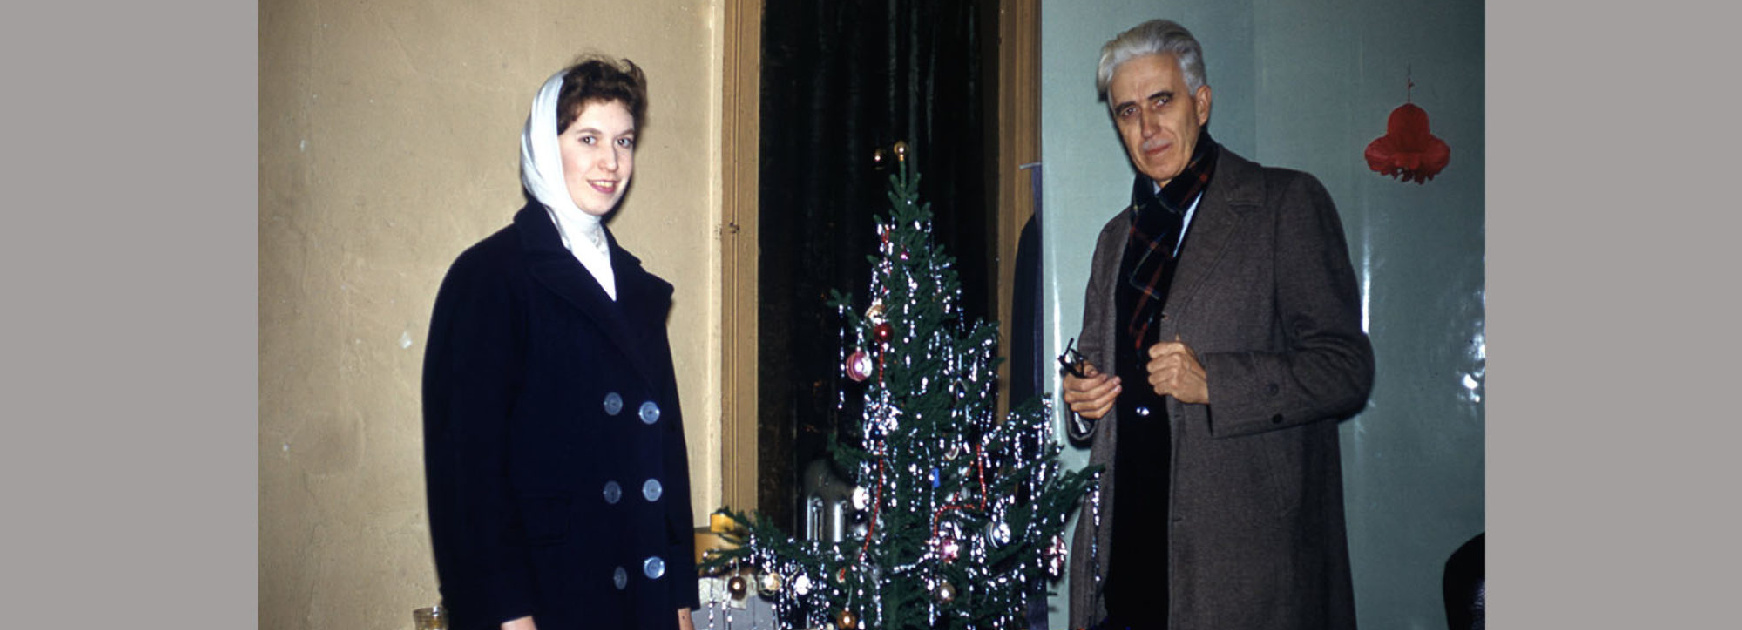 35mm slide photograph (1959) of Clyfford and Diane Still gathered around a Christmas tree in the studio at 128 West 23rd Street, New York City where they lived.